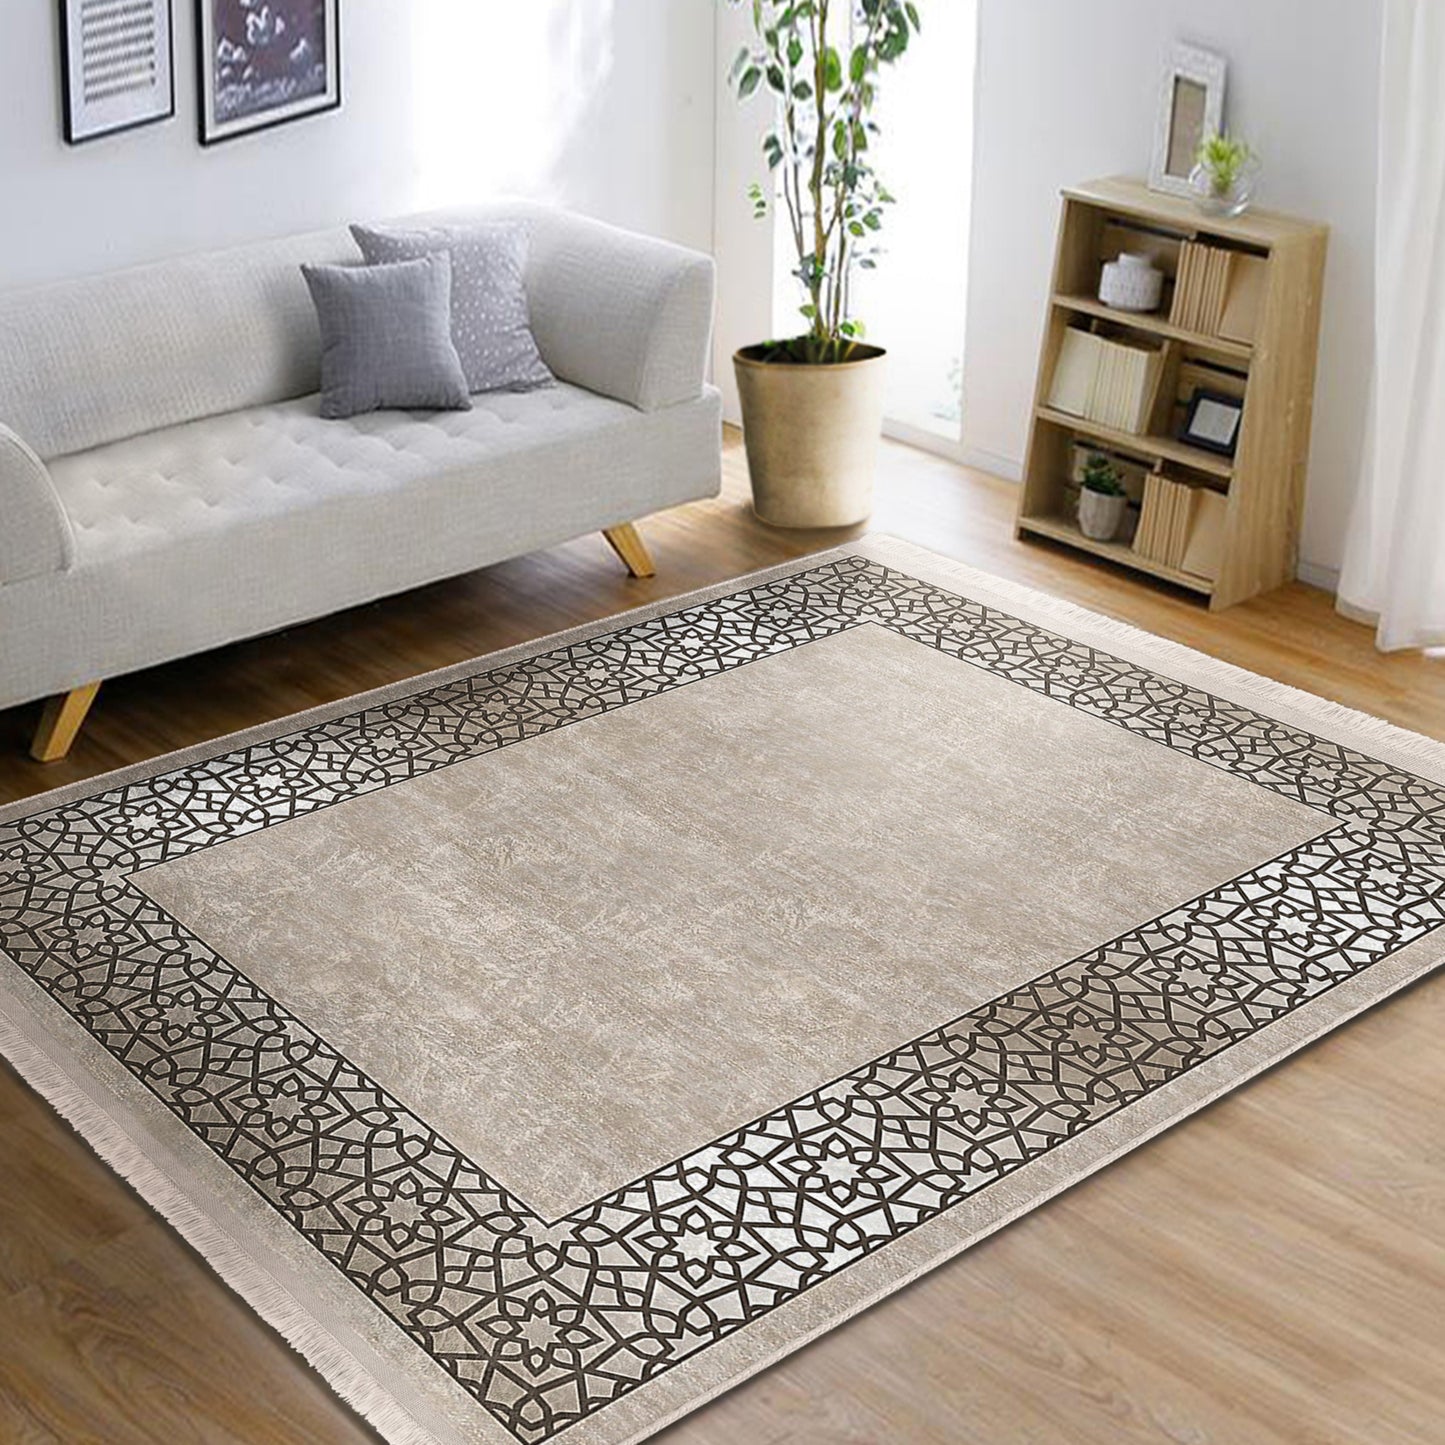 Charm and Comfort: Classic Motifs Washable Area Rug